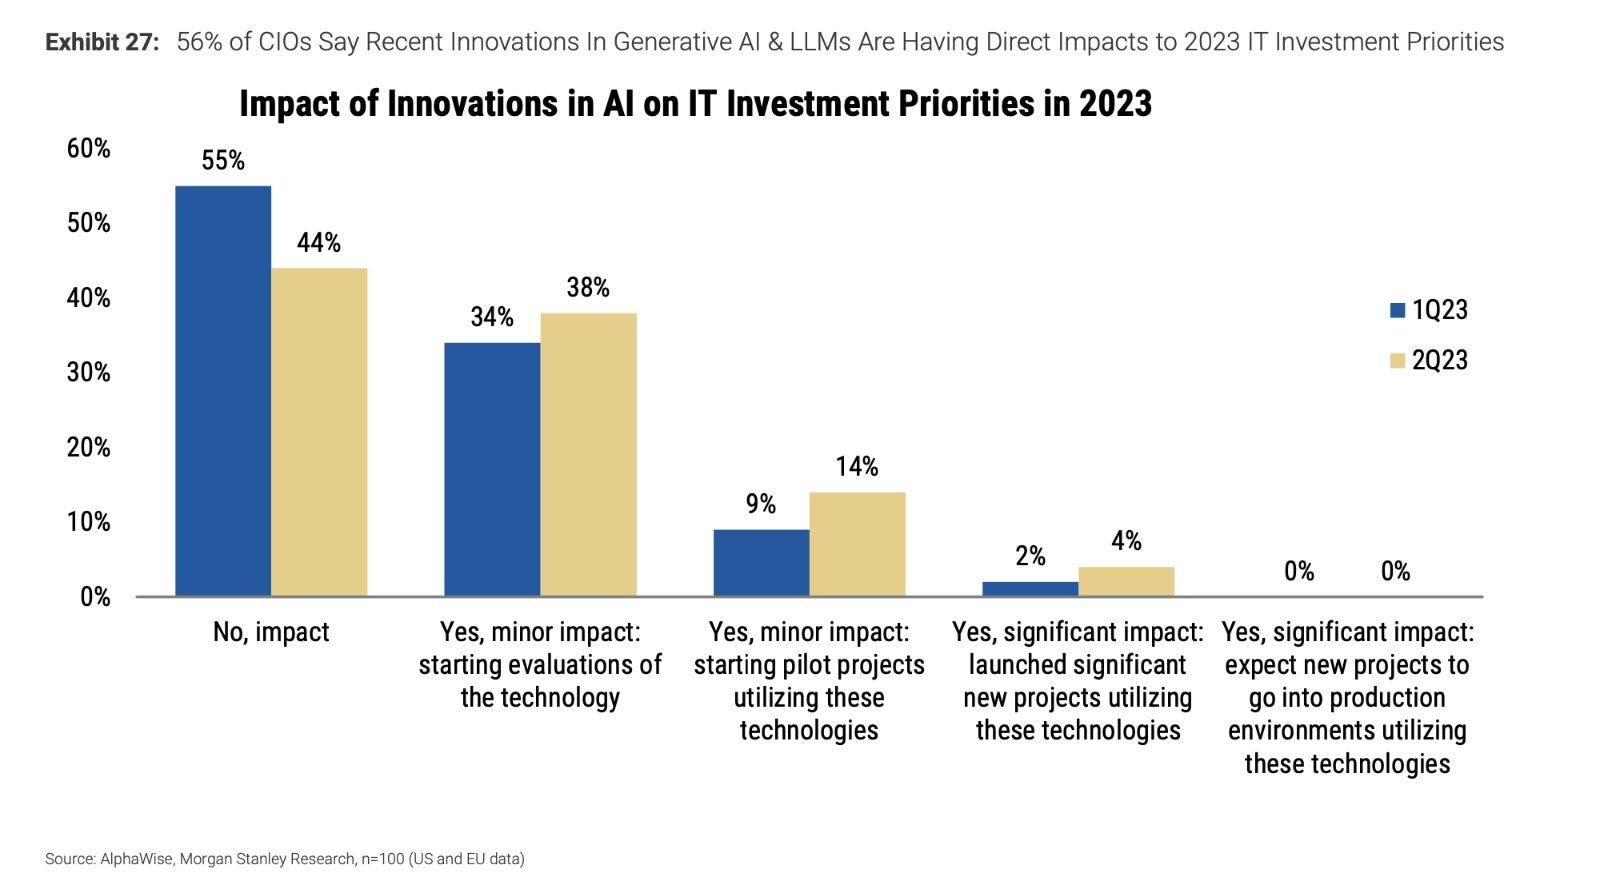 chart from morgan stanley research - impact of innovations in AI on IT investment priorities in 2023